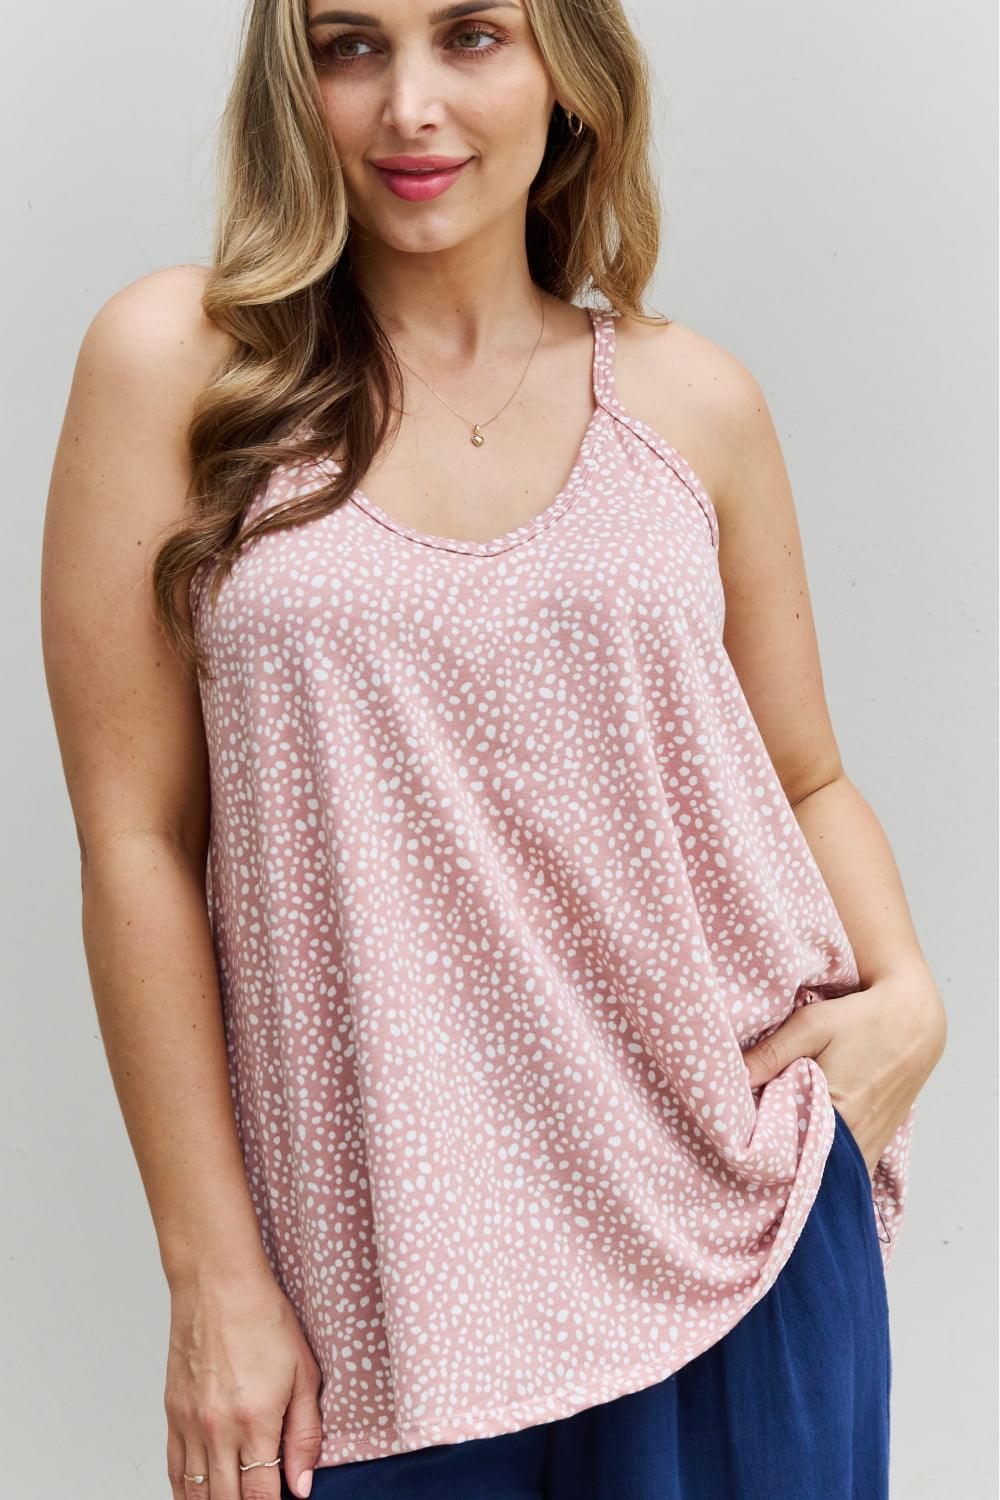 HOPELY High Love Spaghetti Strap V-Neck Top - PEONIES + LIME